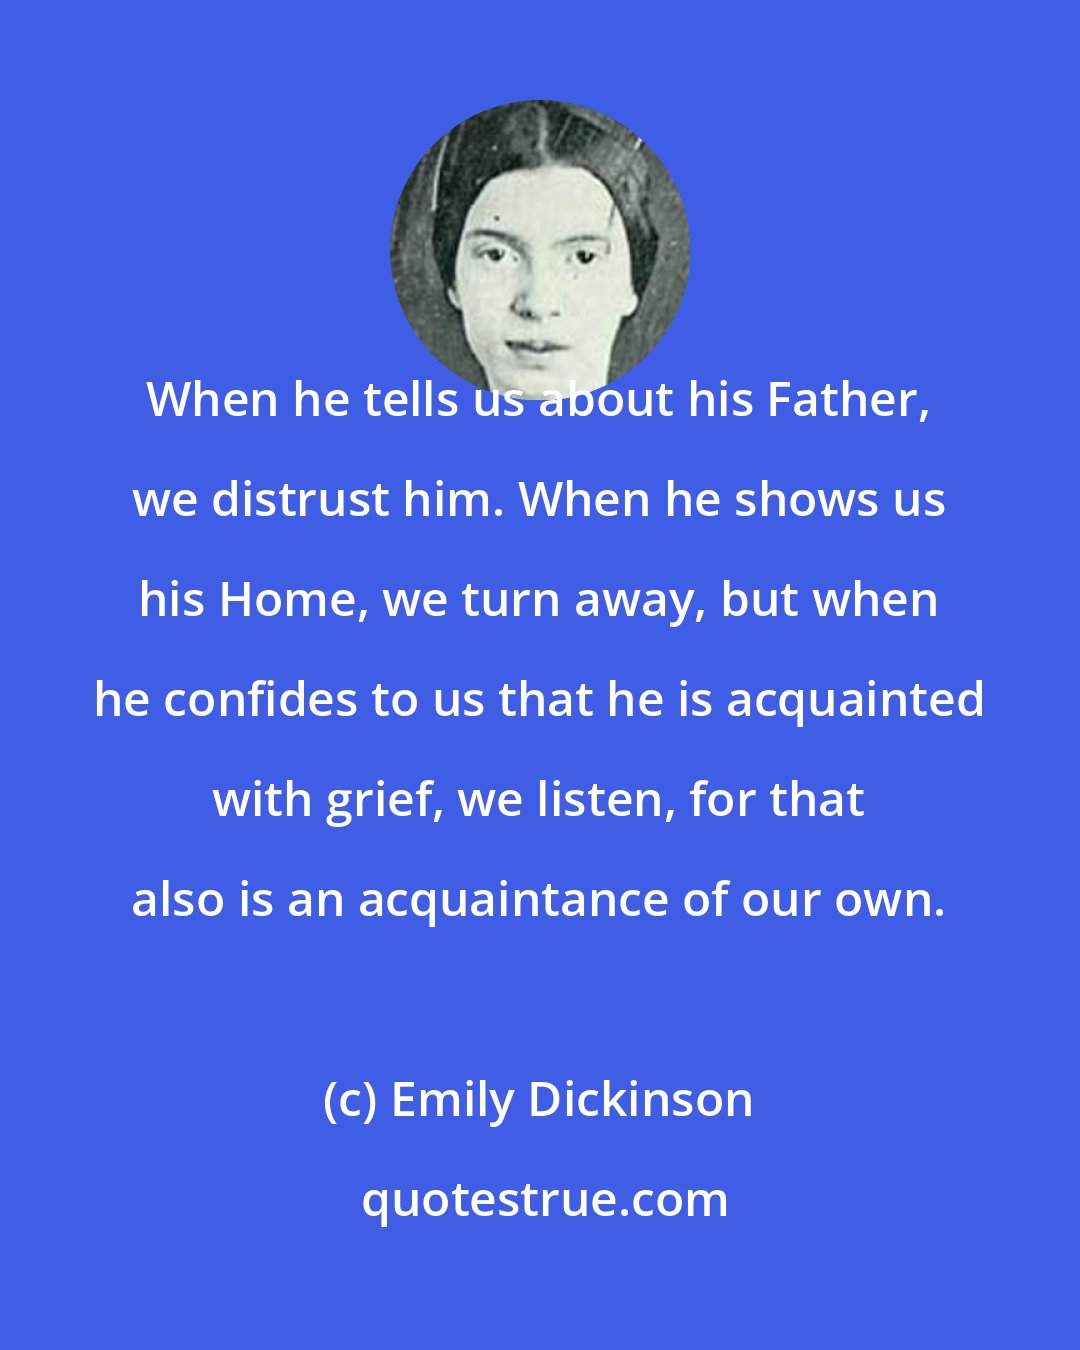 Emily Dickinson: When he tells us about his Father, we distrust him. When he shows us his Home, we turn away, but when he confides to us that he is acquainted with grief, we listen, for that also is an acquaintance of our own.